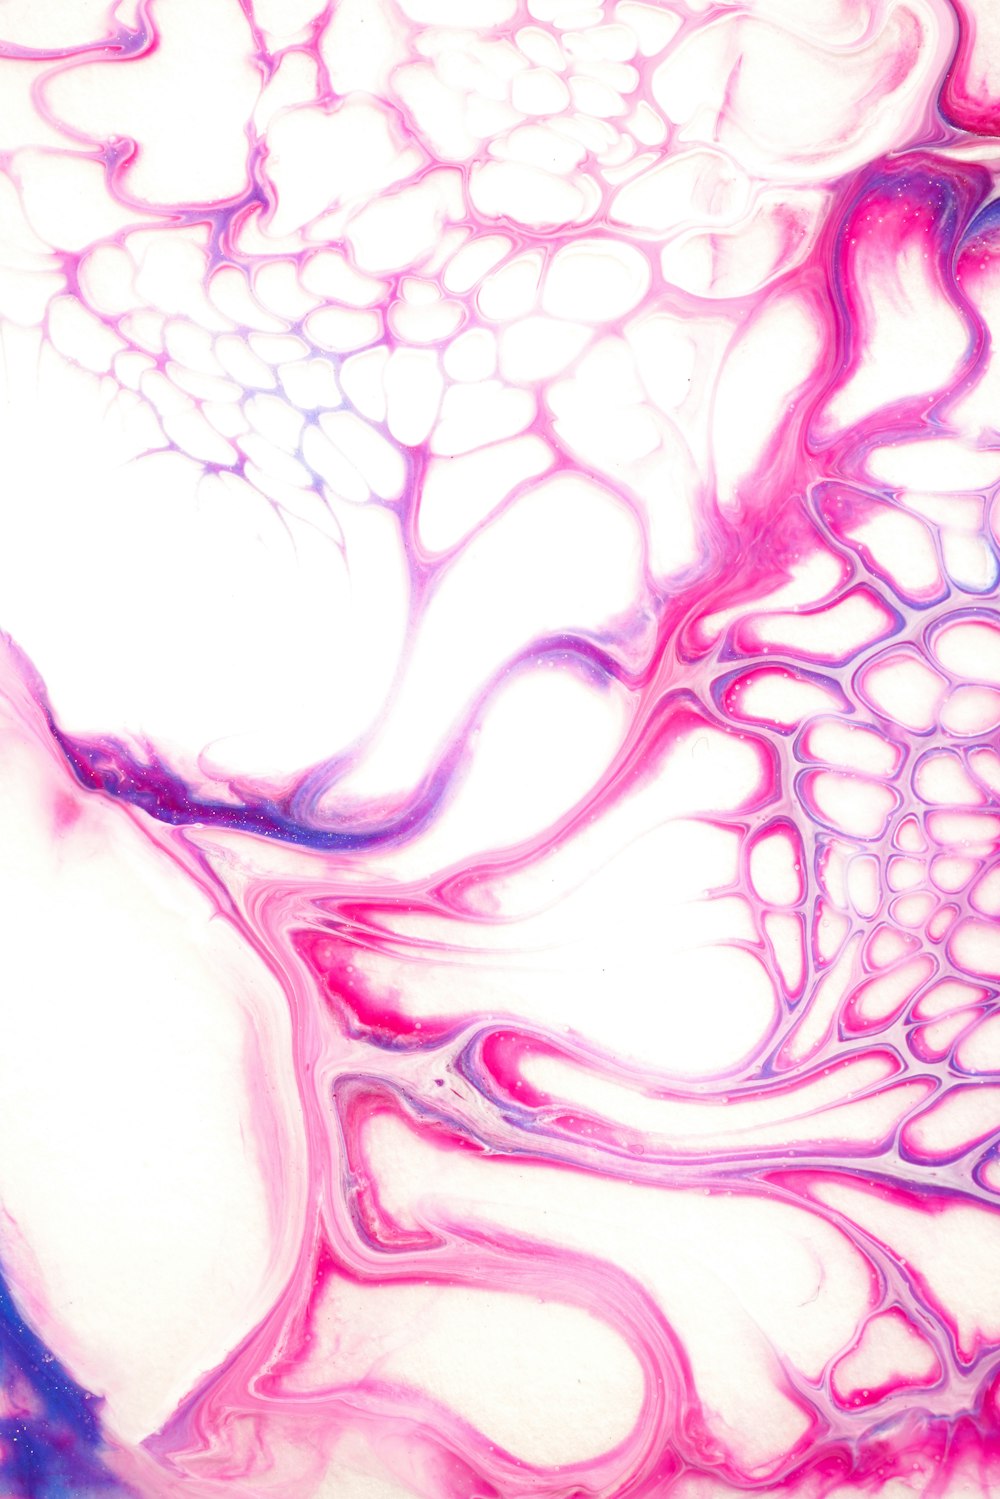 a close up view of a pink and blue substance